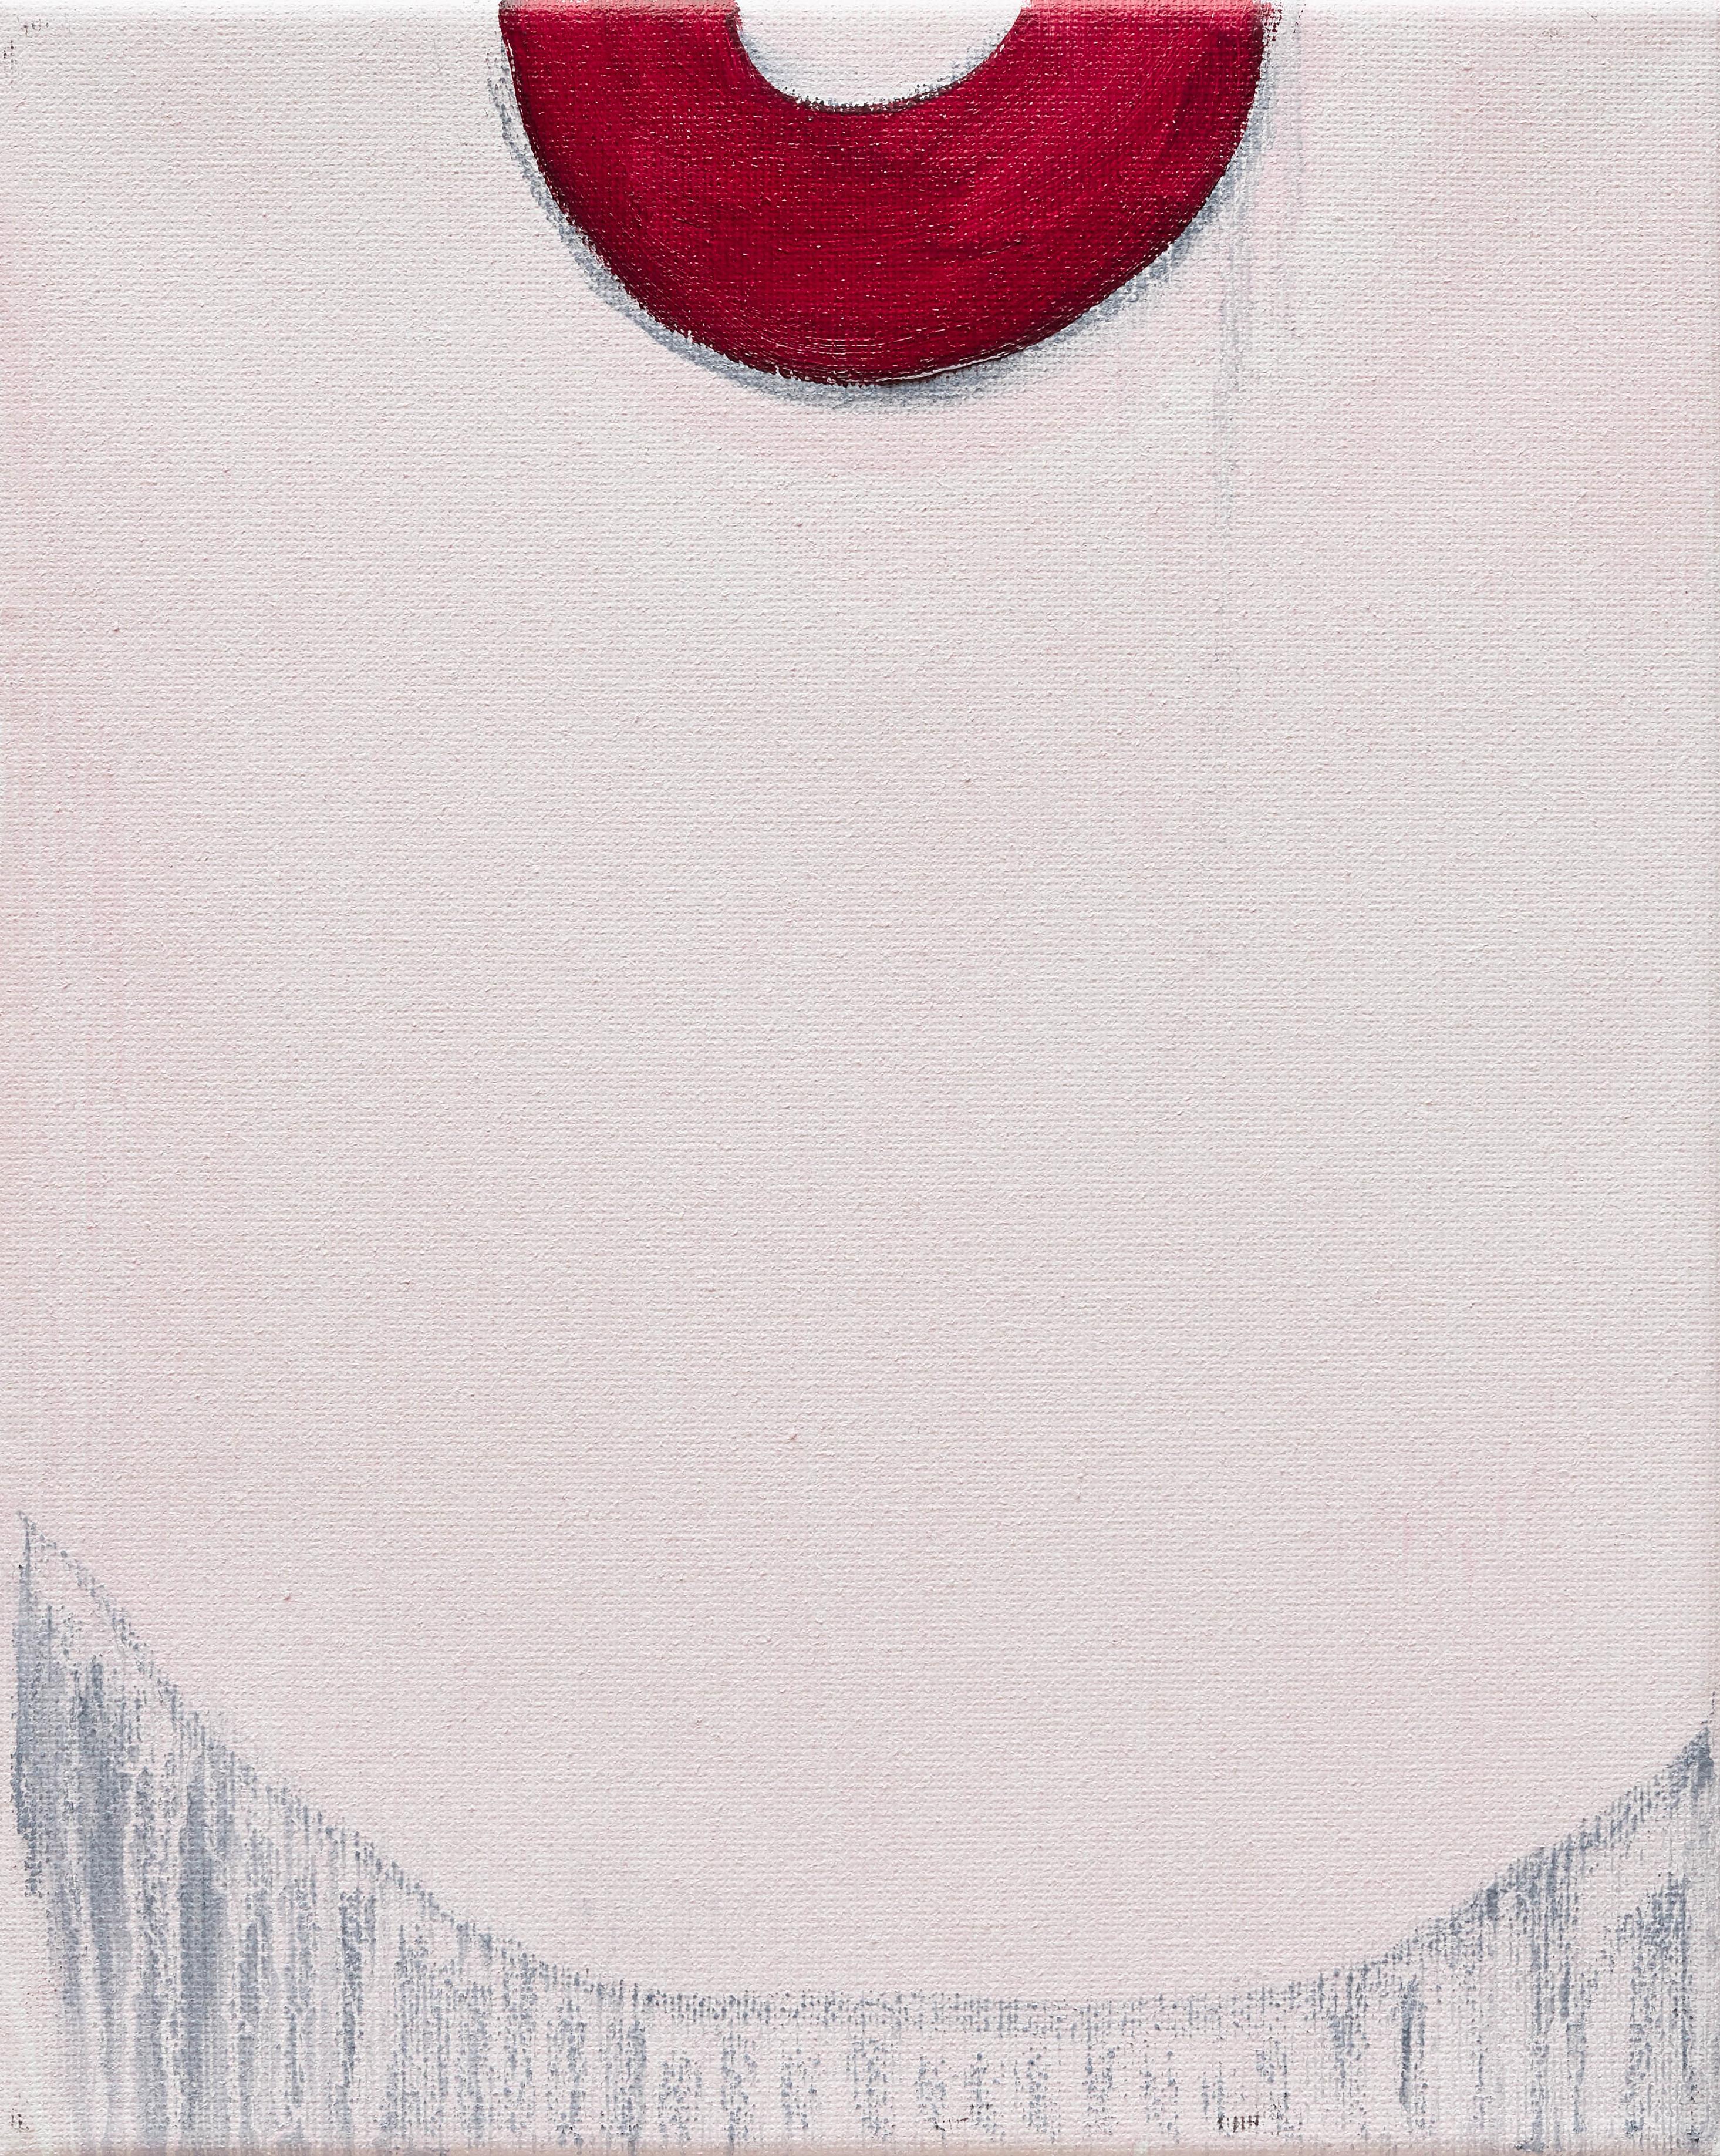 Mel Reese Abstract Painting - "Body Abstraction no. 11", contemporary pink & red abstract body painting